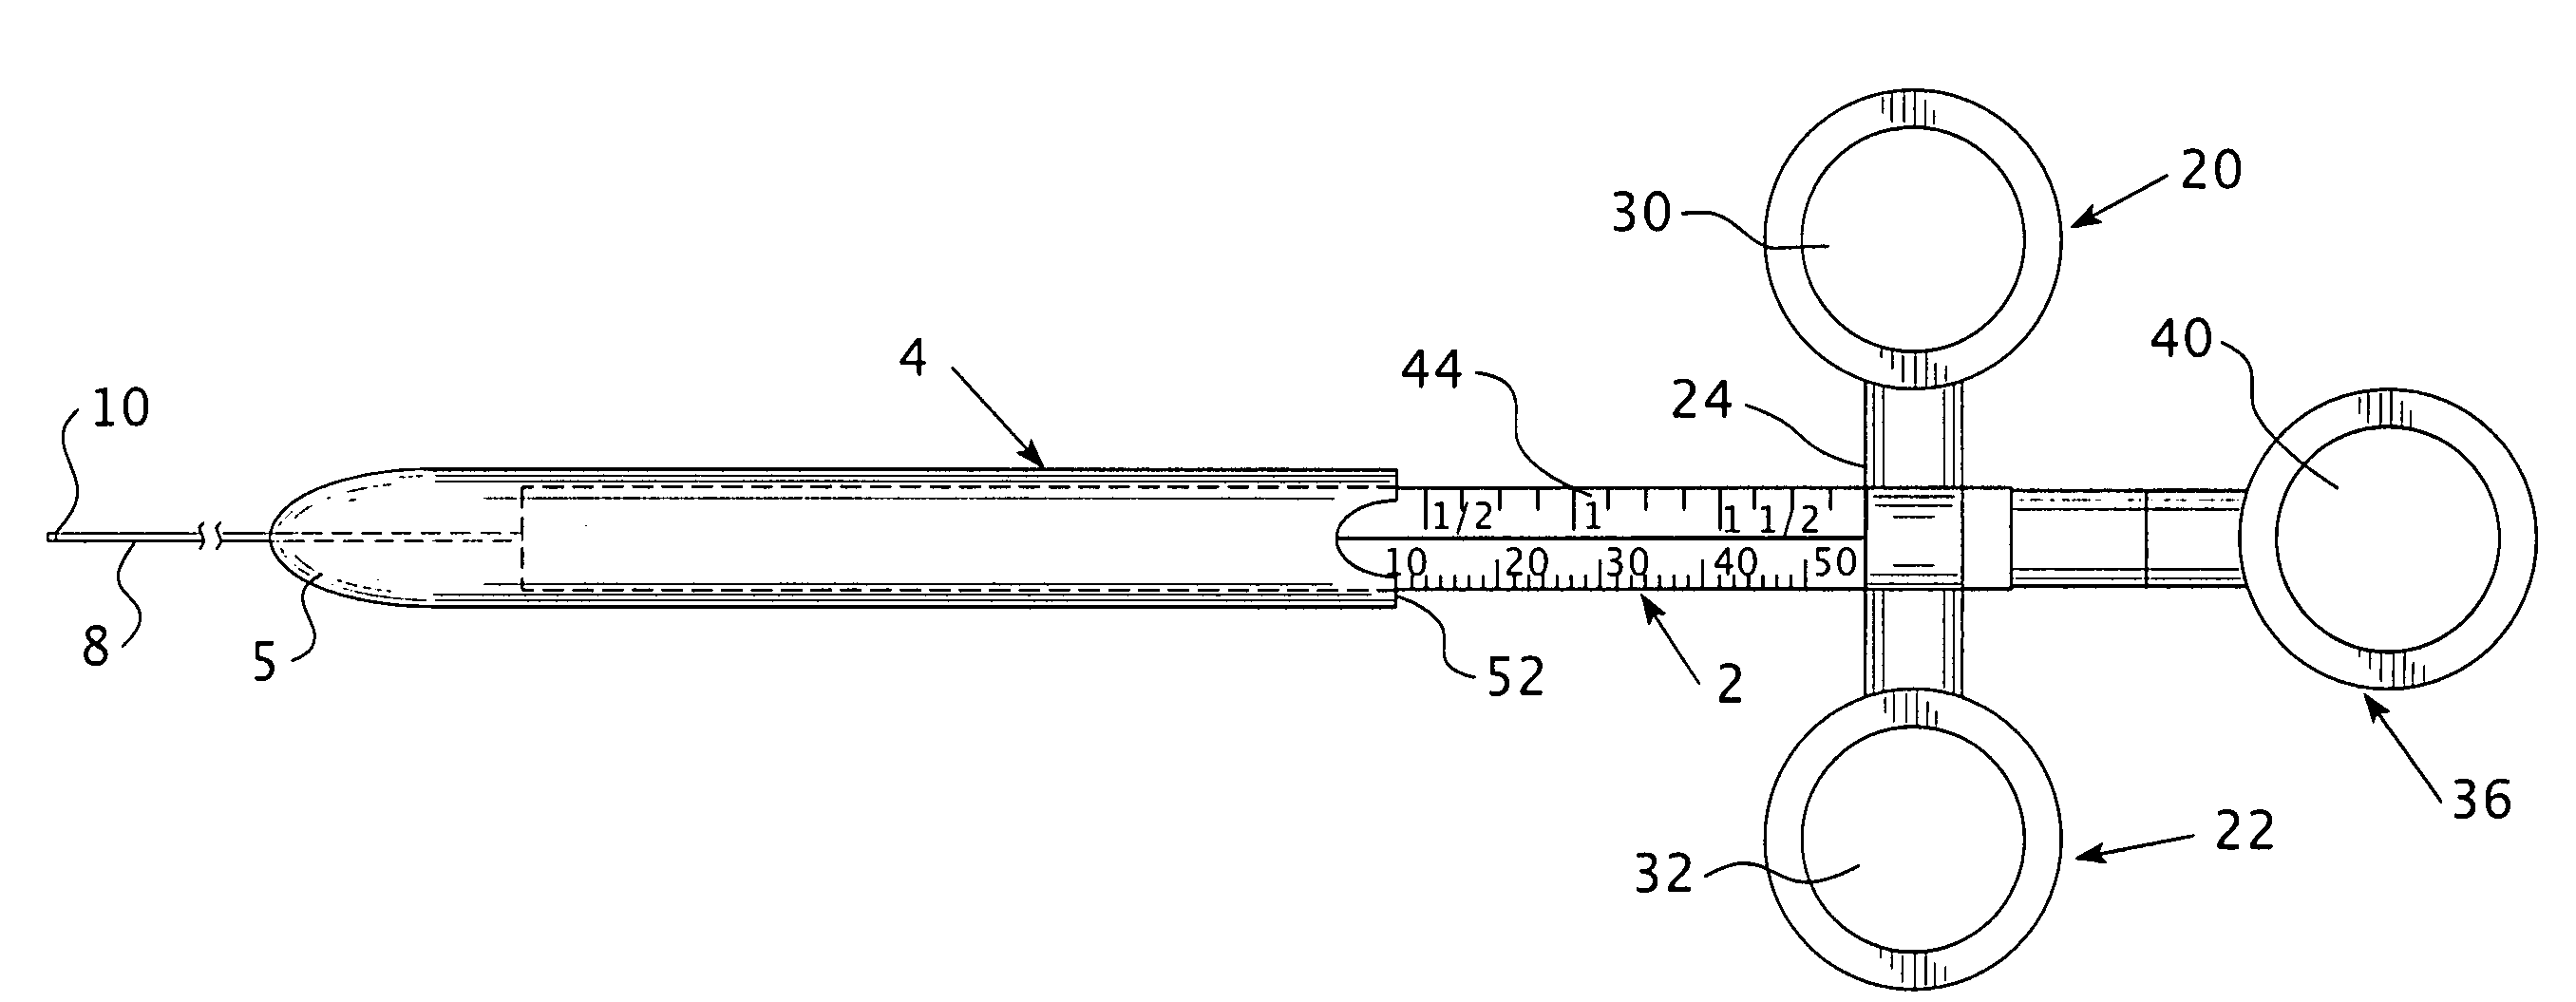 Apparatus for measuring depth of a bone opening and related method